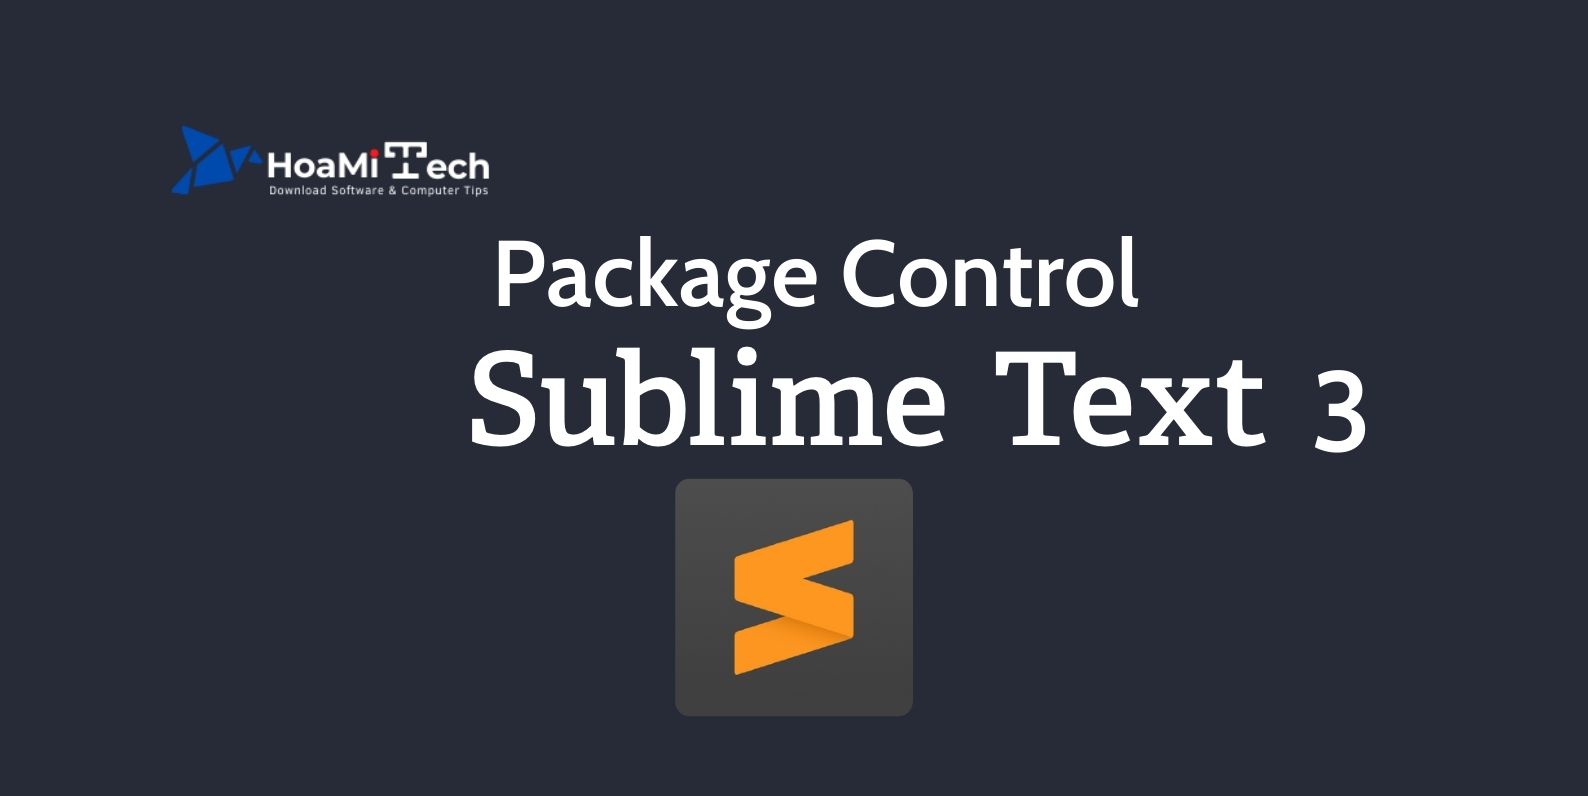 sublime text install autohotkey with package control